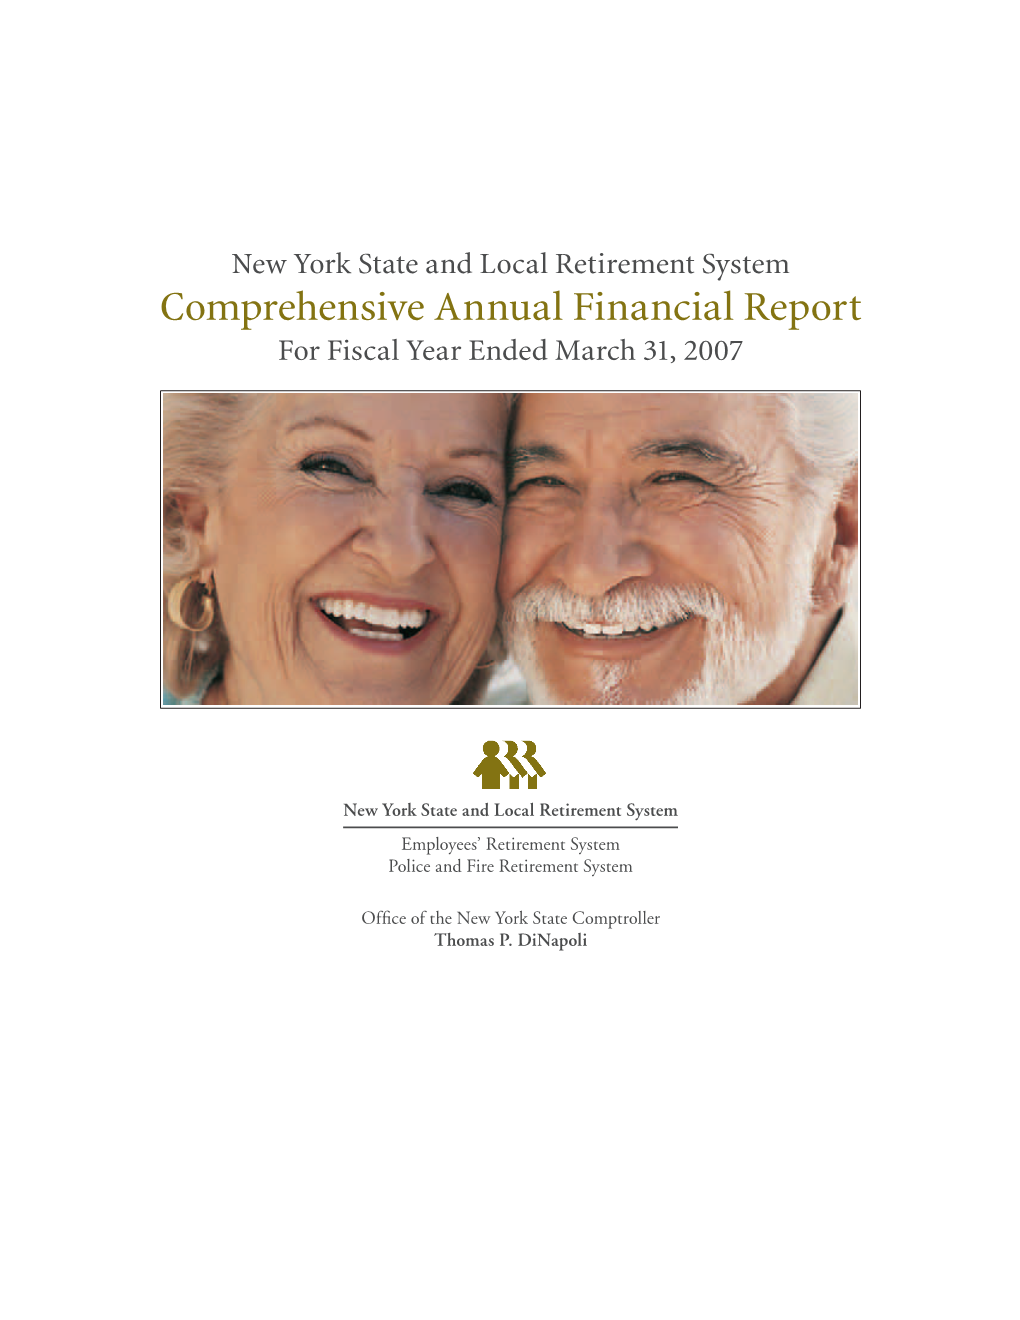 Comprehensive Annual Financial Report for Fiscal Year Ended March 31, 2007